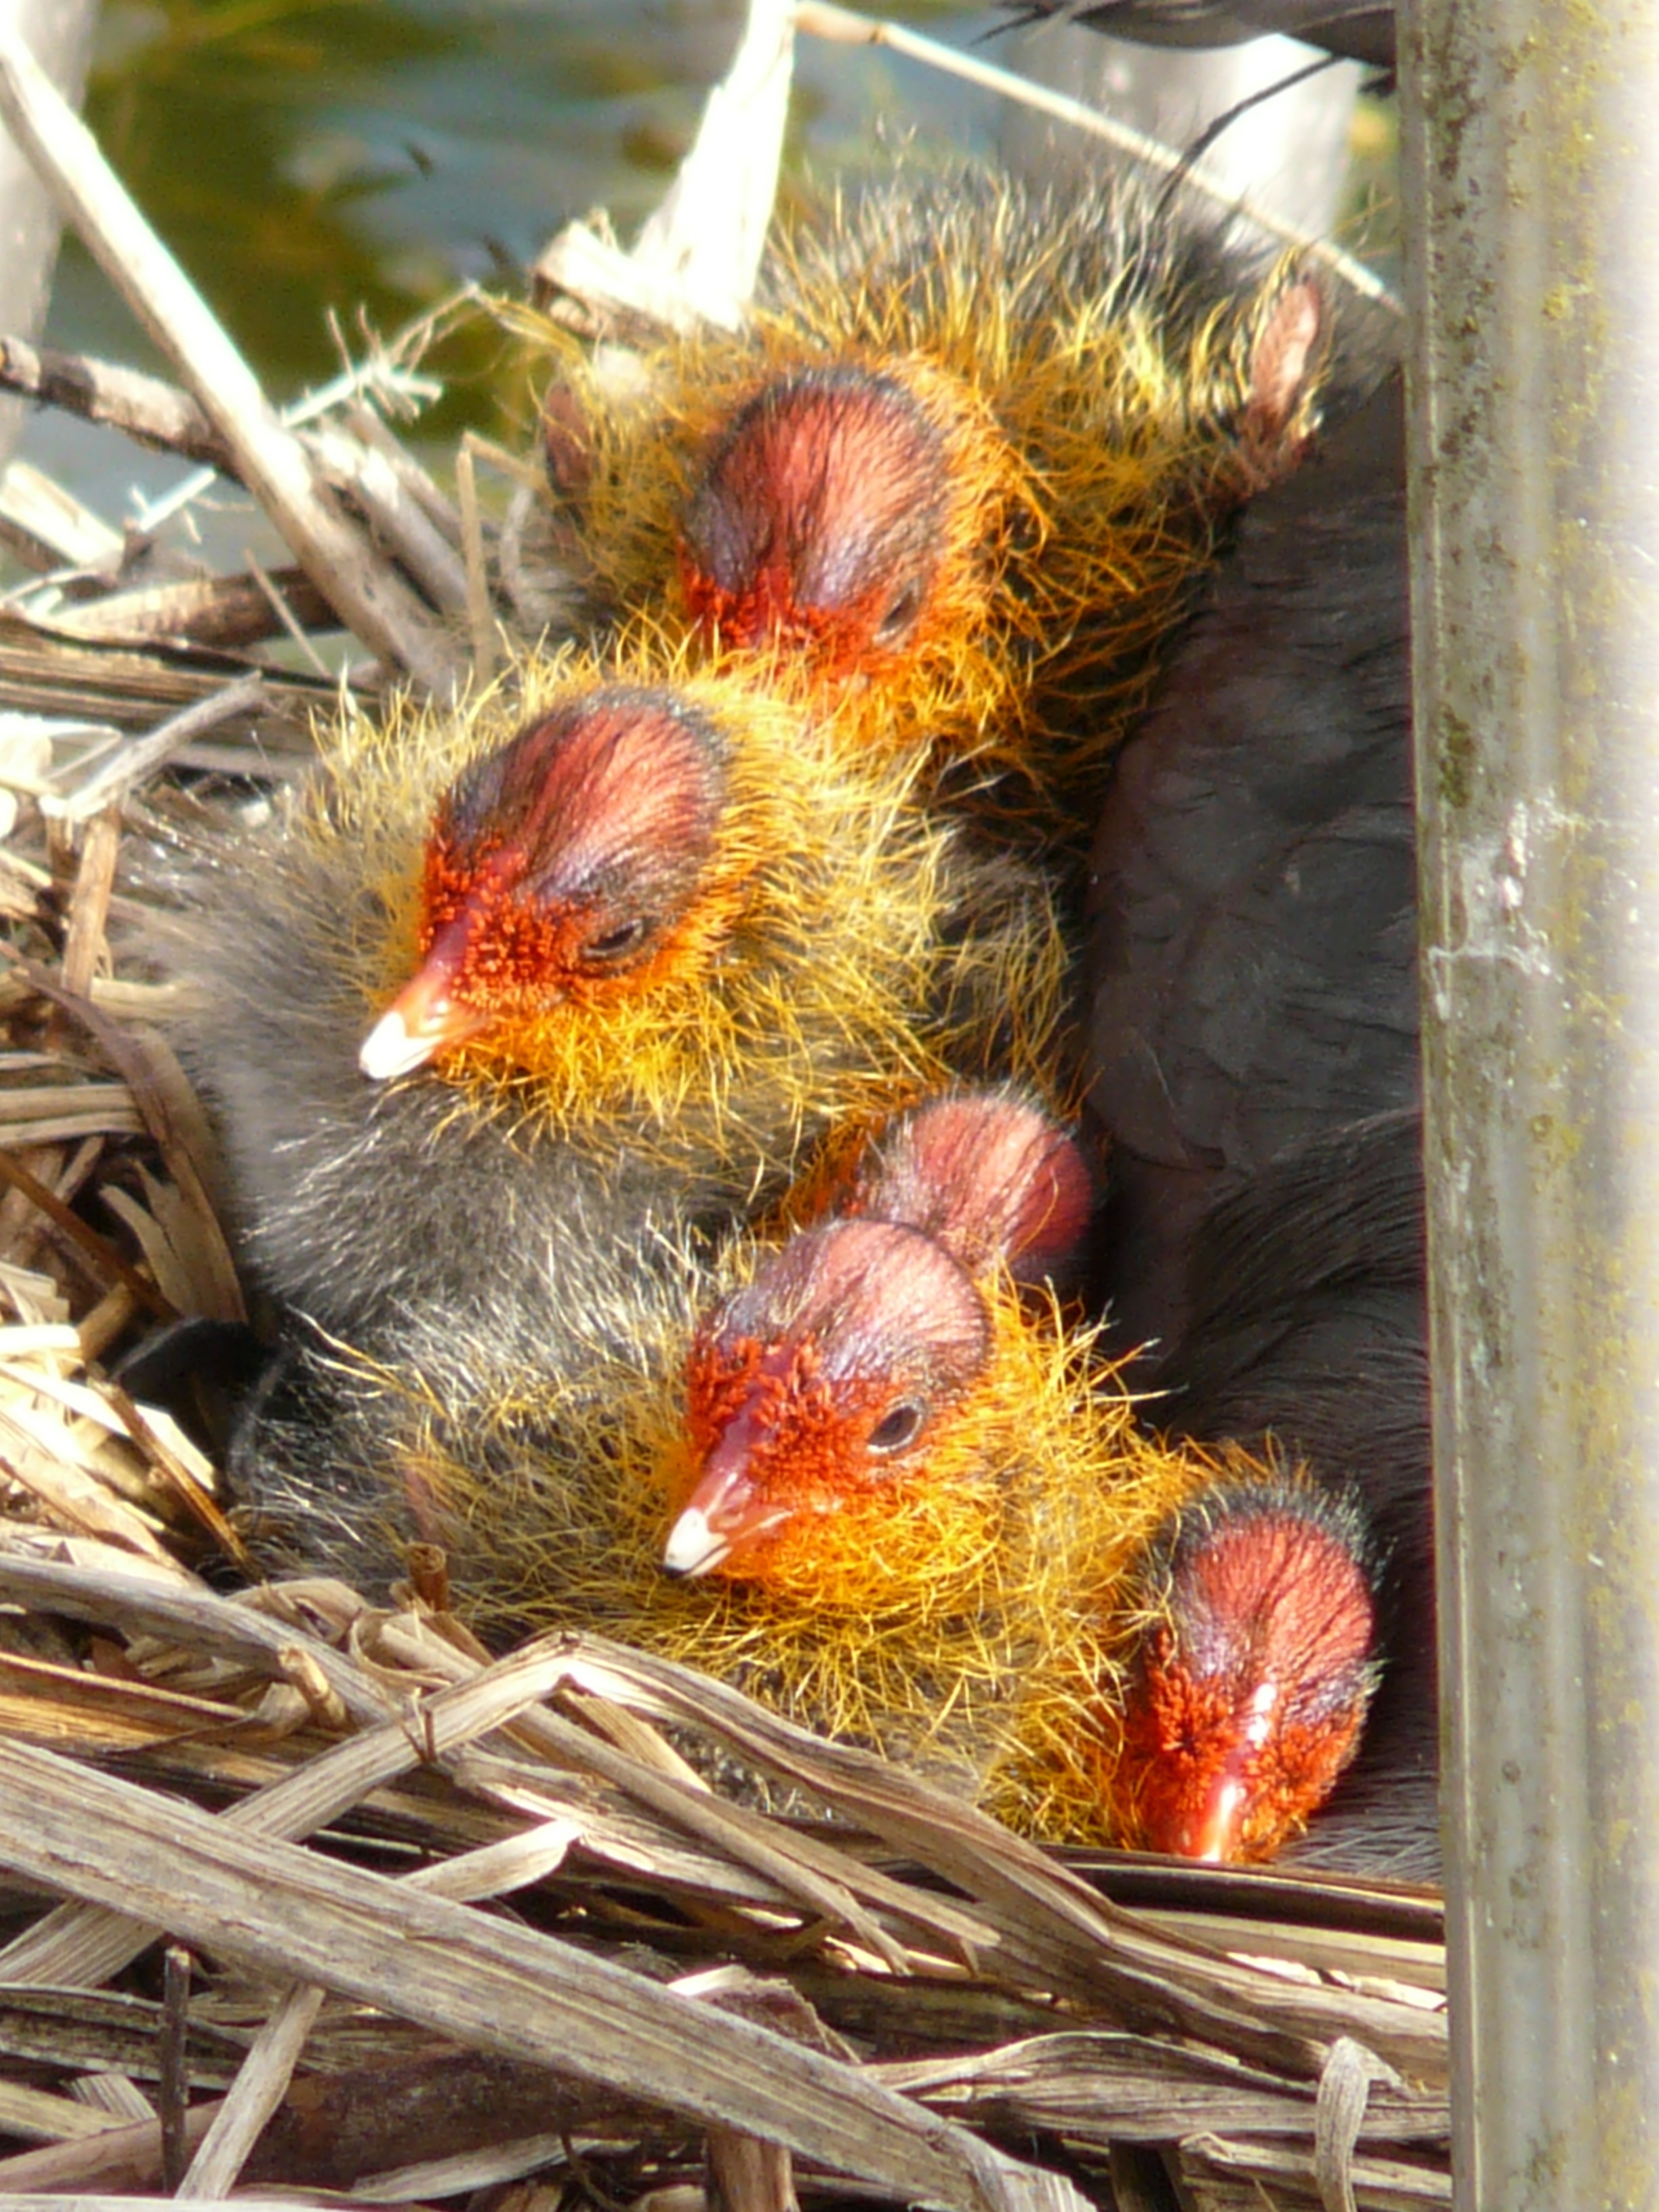 gray yellow and red chicks